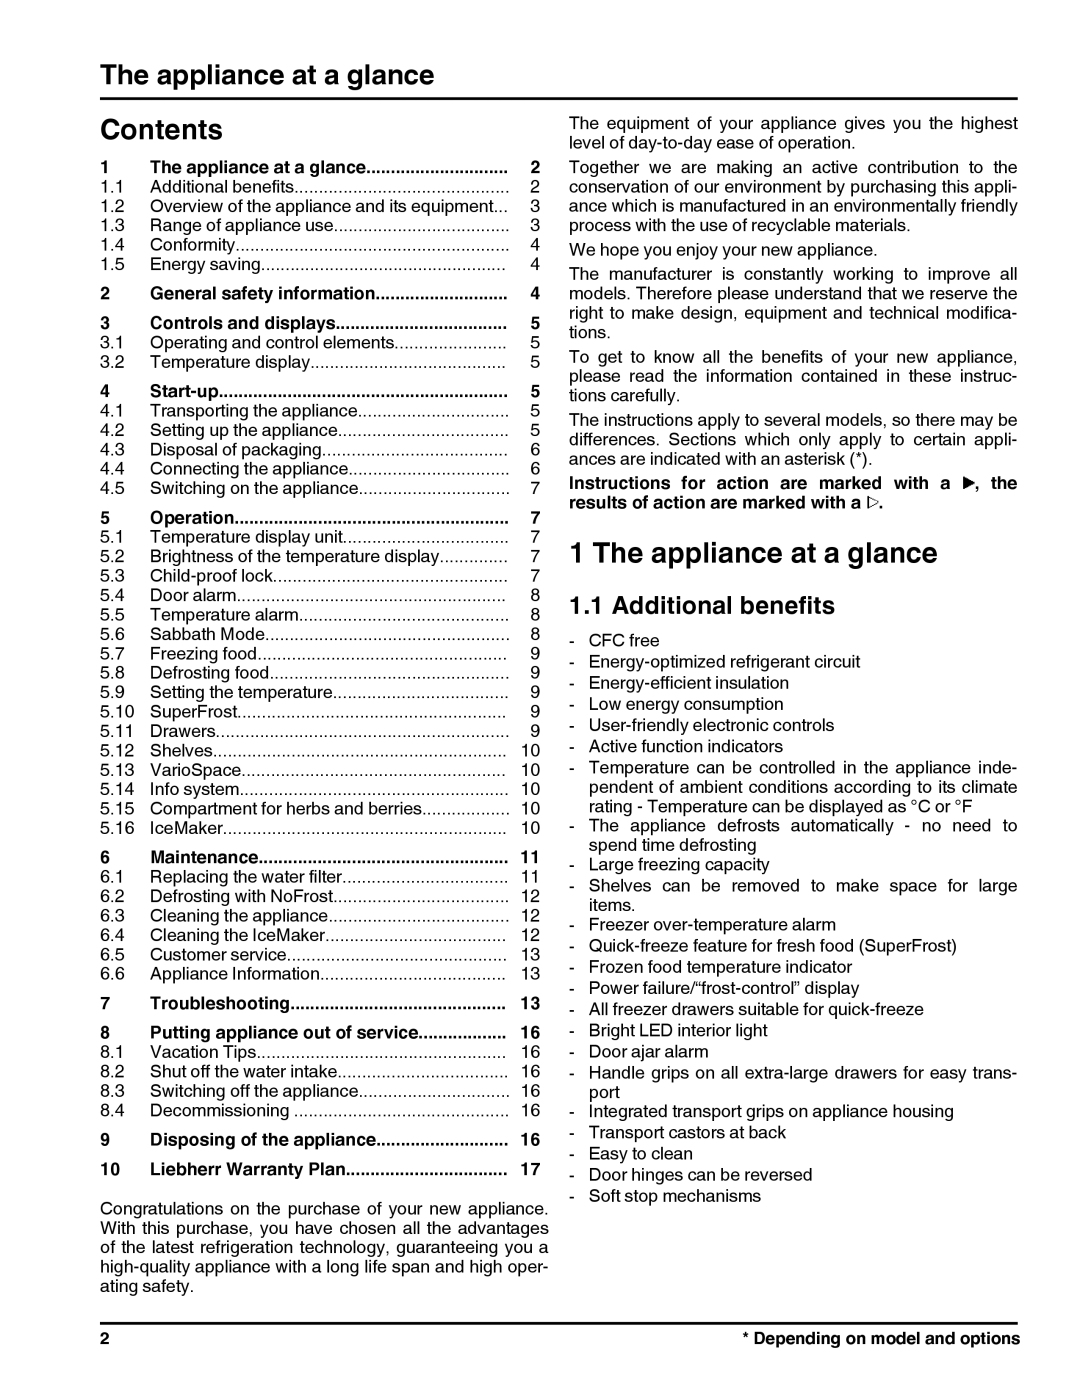 Liebherr FI1051, F1051 manual The appliance at a glance, Contents, Additional benefits 